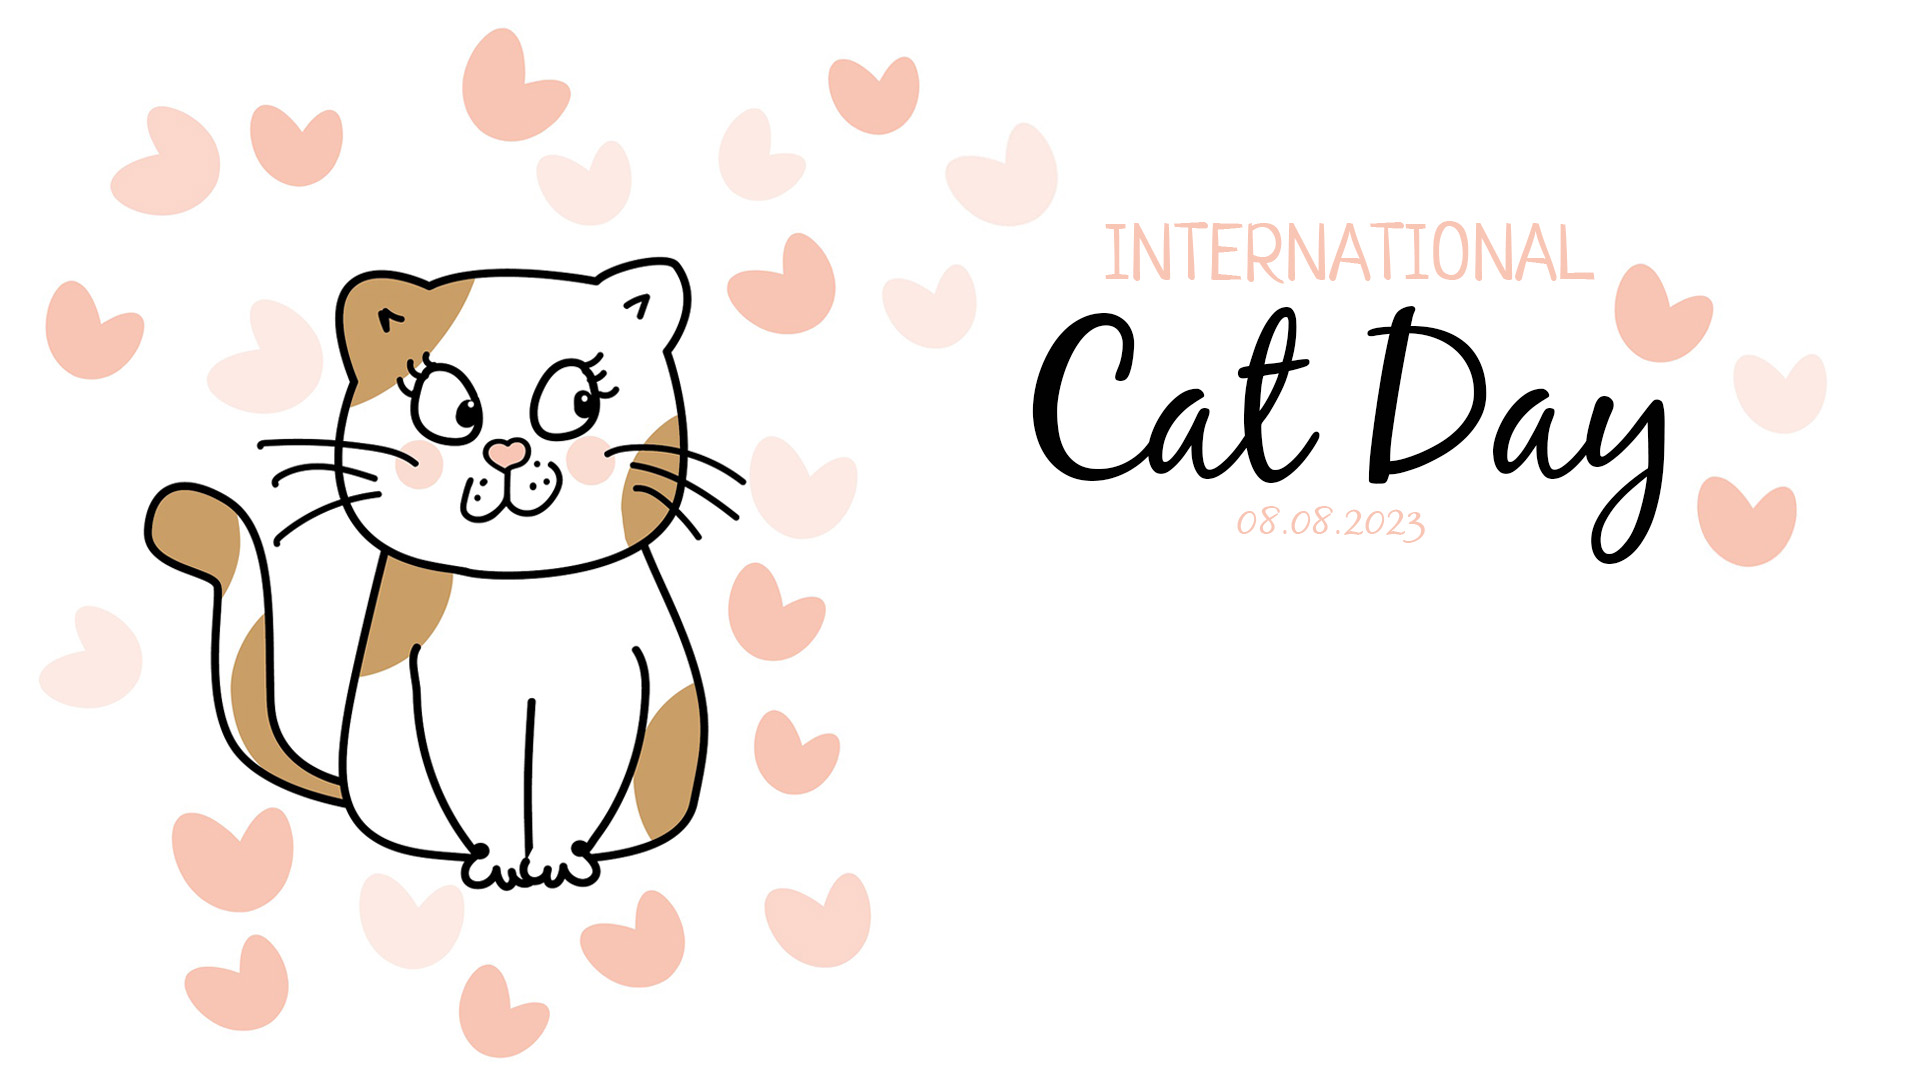 On the left side of the screen there is a illustrated white and brown spotted cat with black outlines. The cat is sitting looking to the right of the screen. The cat is surrounded by 3 different shades of pink hearts. Towards the right of the screen International Cat Day 08.08.2023 is written out. International is written in a light pink font and right below it reads Cat Day in a black cursive font. Below it sits the date in a light shade of pink.